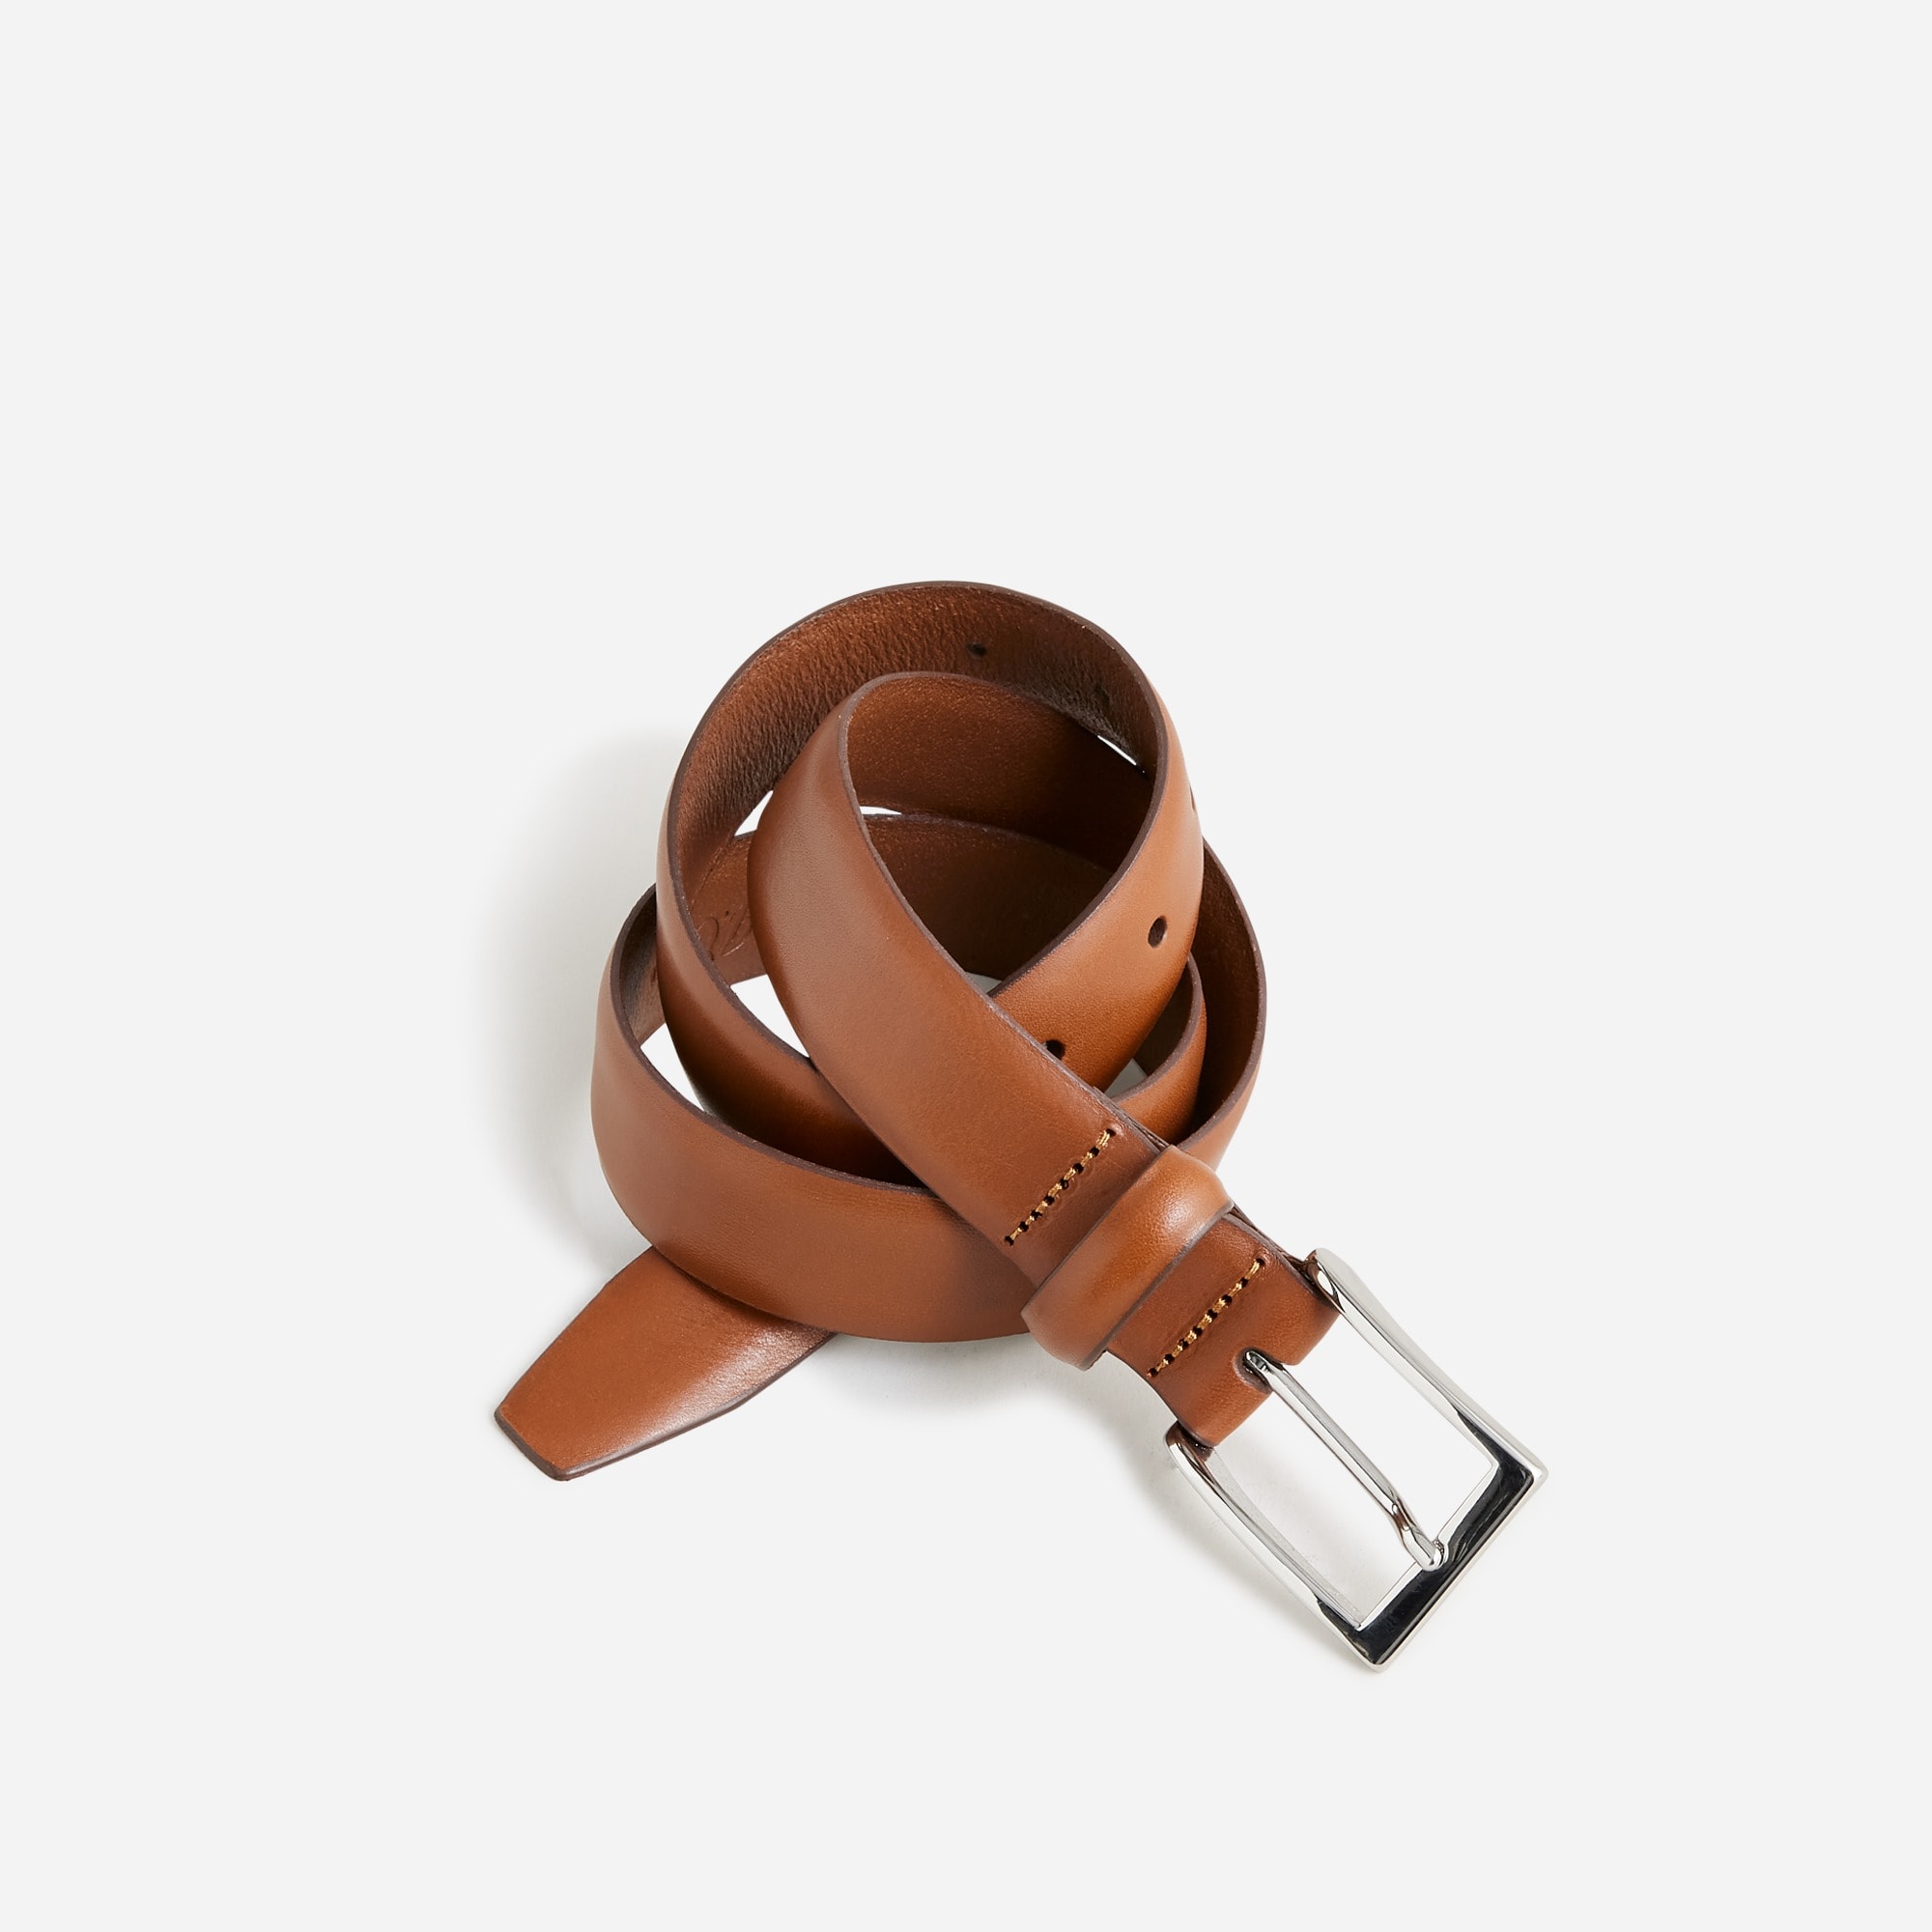 No. 1 Leather Belt - Italian Bridle Leather - Brown Leather with Brass, Large. Adjusts to Fit Sizes 34 - 42